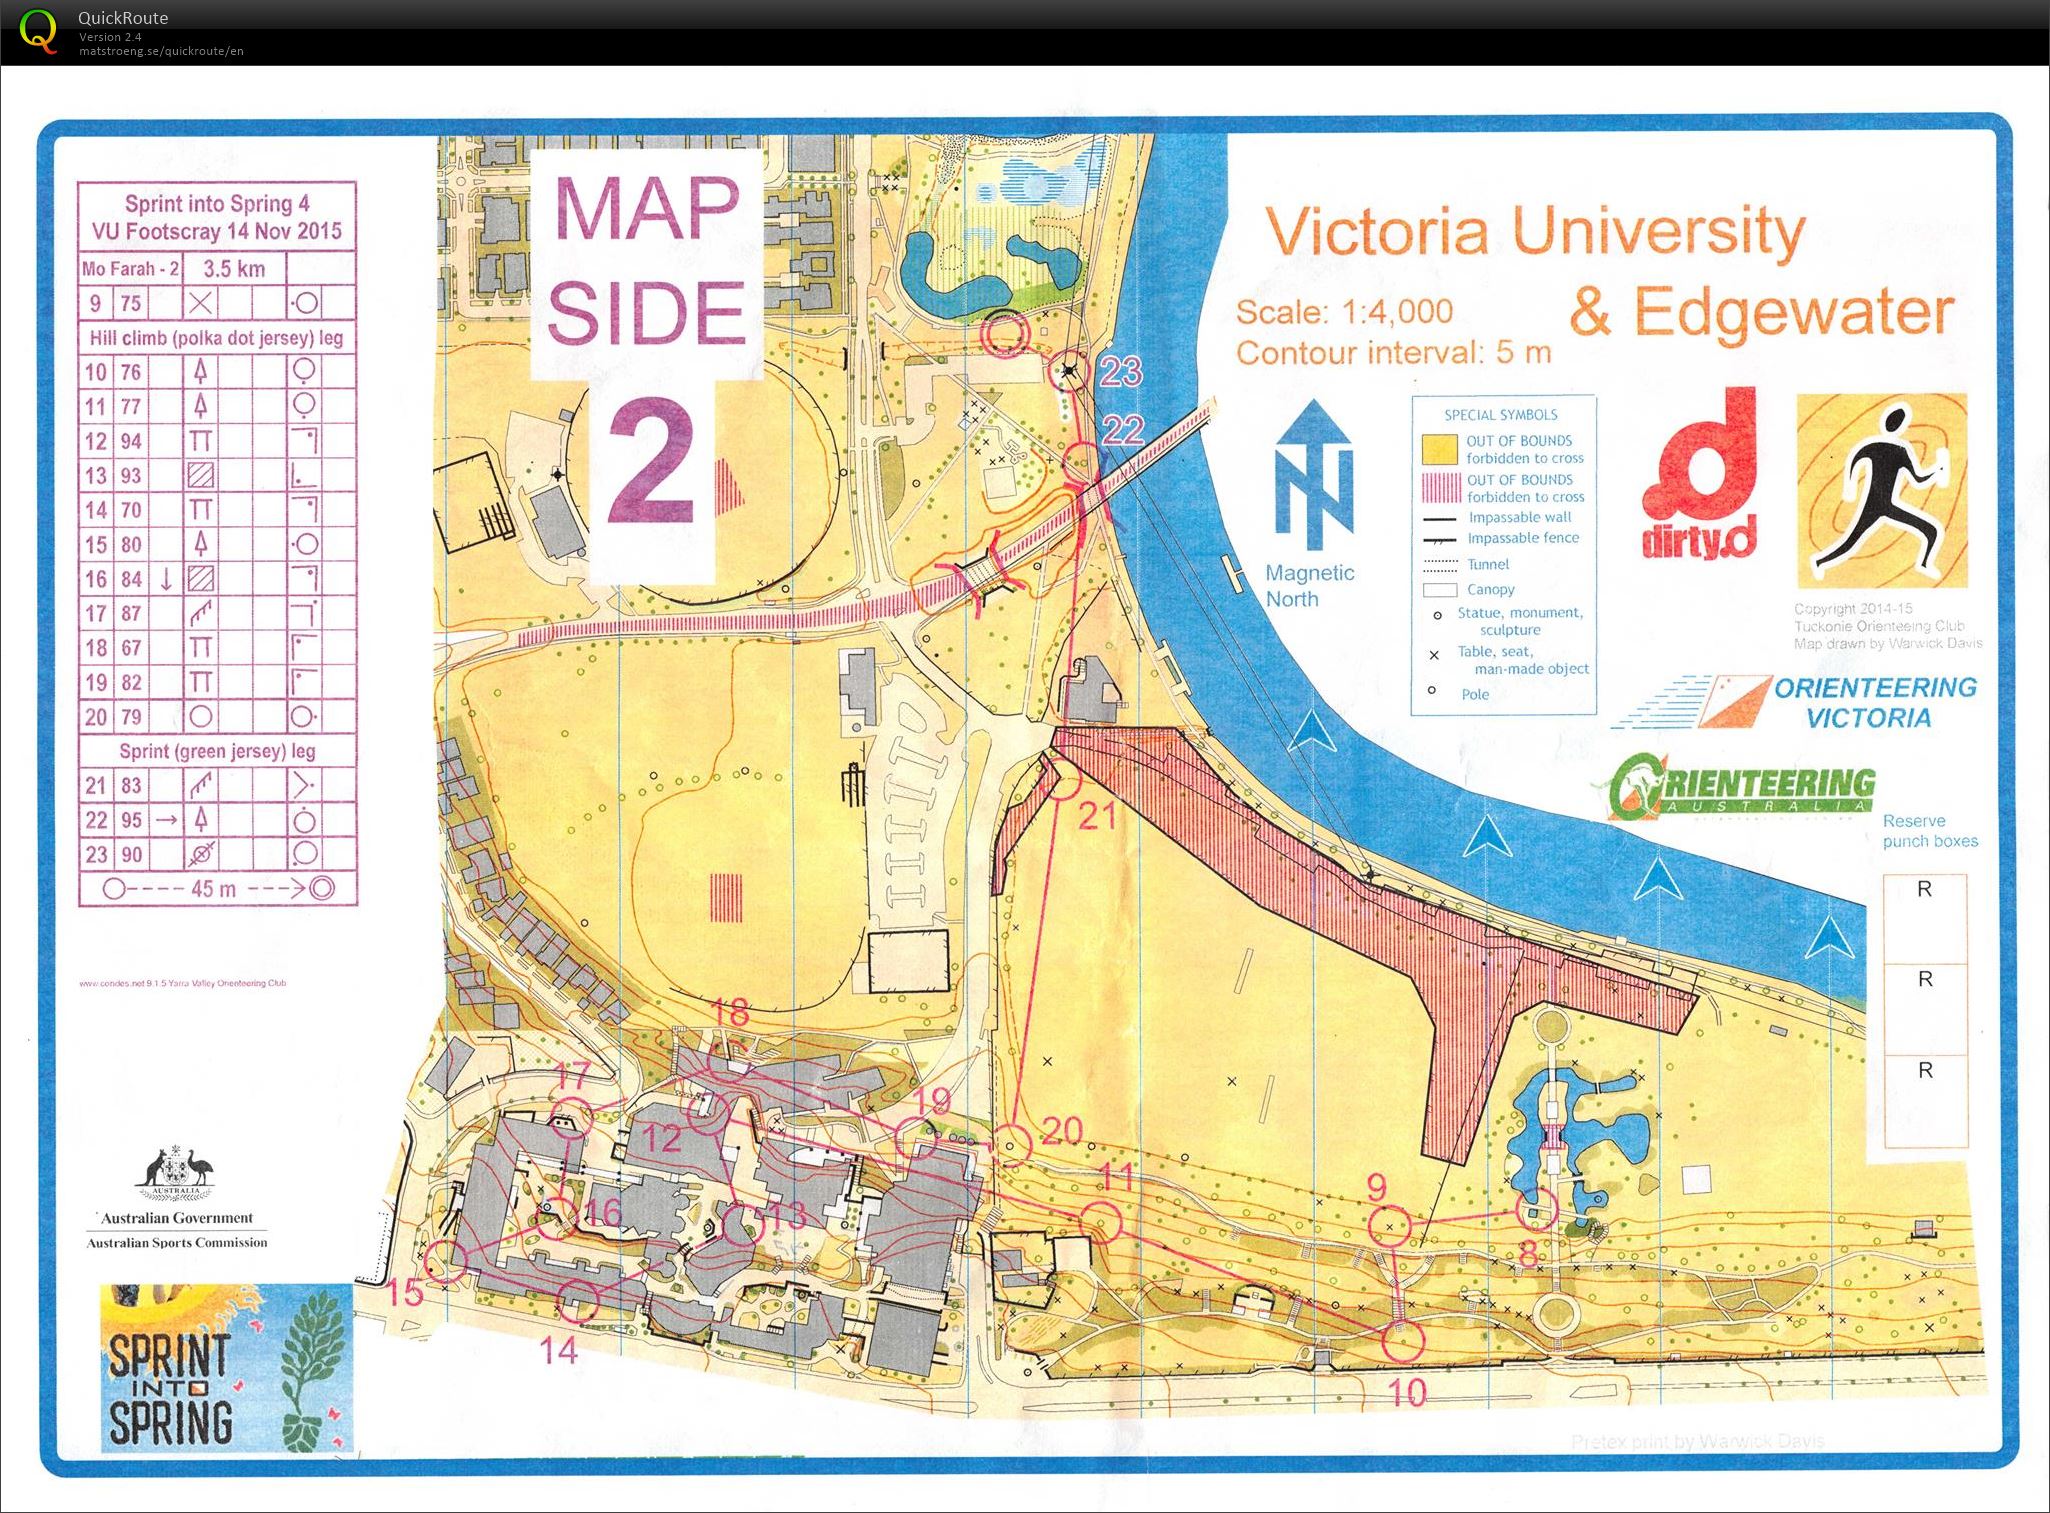 2015 Sprint into Spring Race 4 map 2 (14.11.2015)